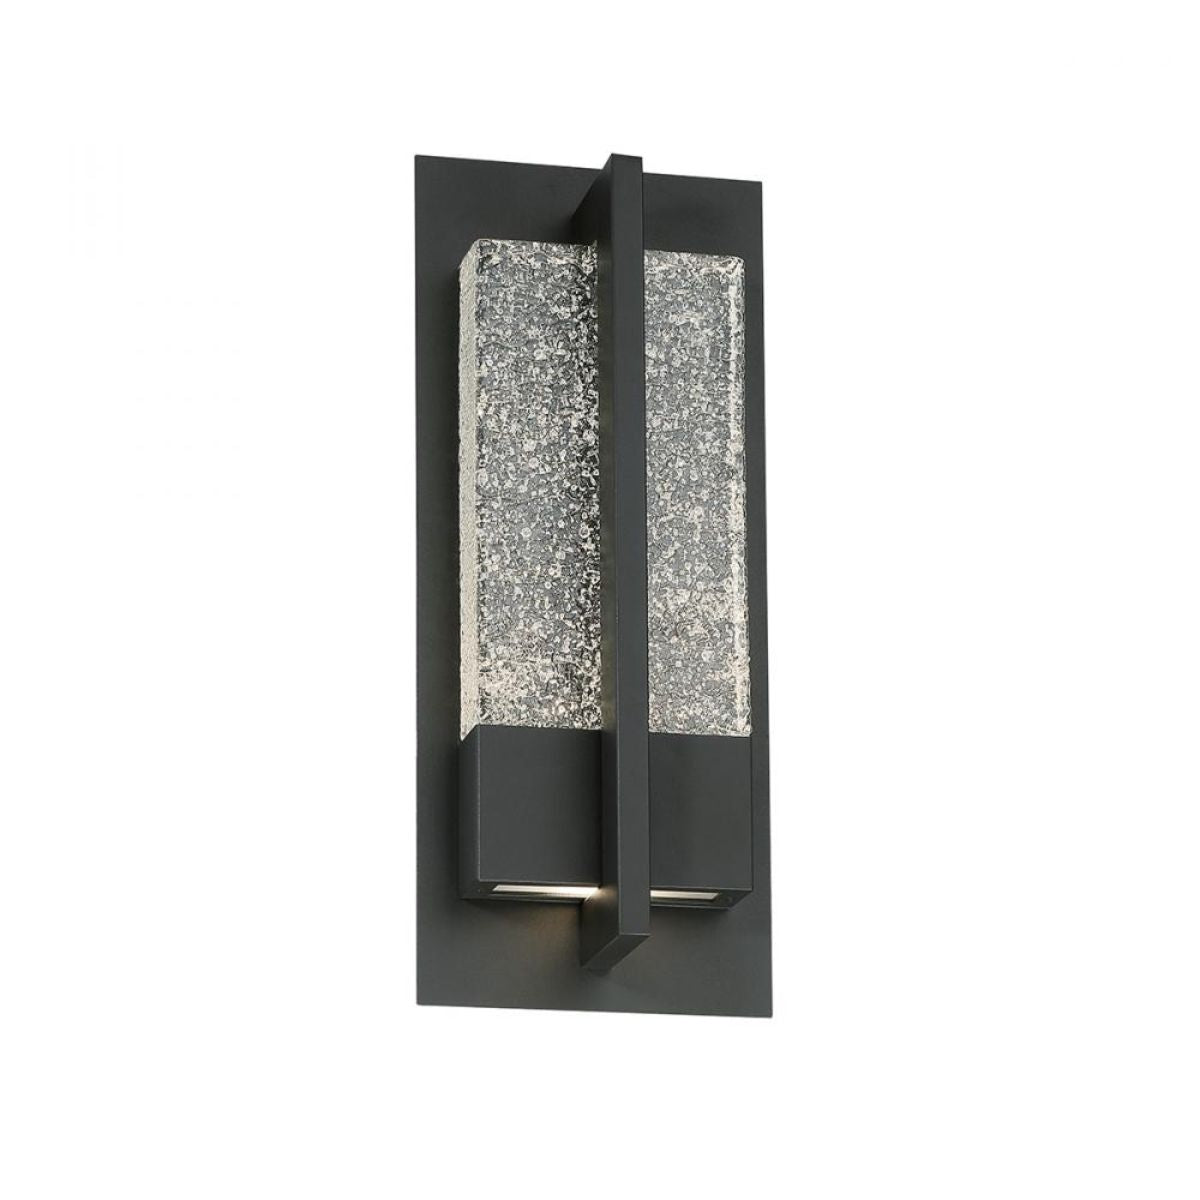 Omni 16 In. LED Outdoor Wall Sconce 90 lumens Bronze Finish